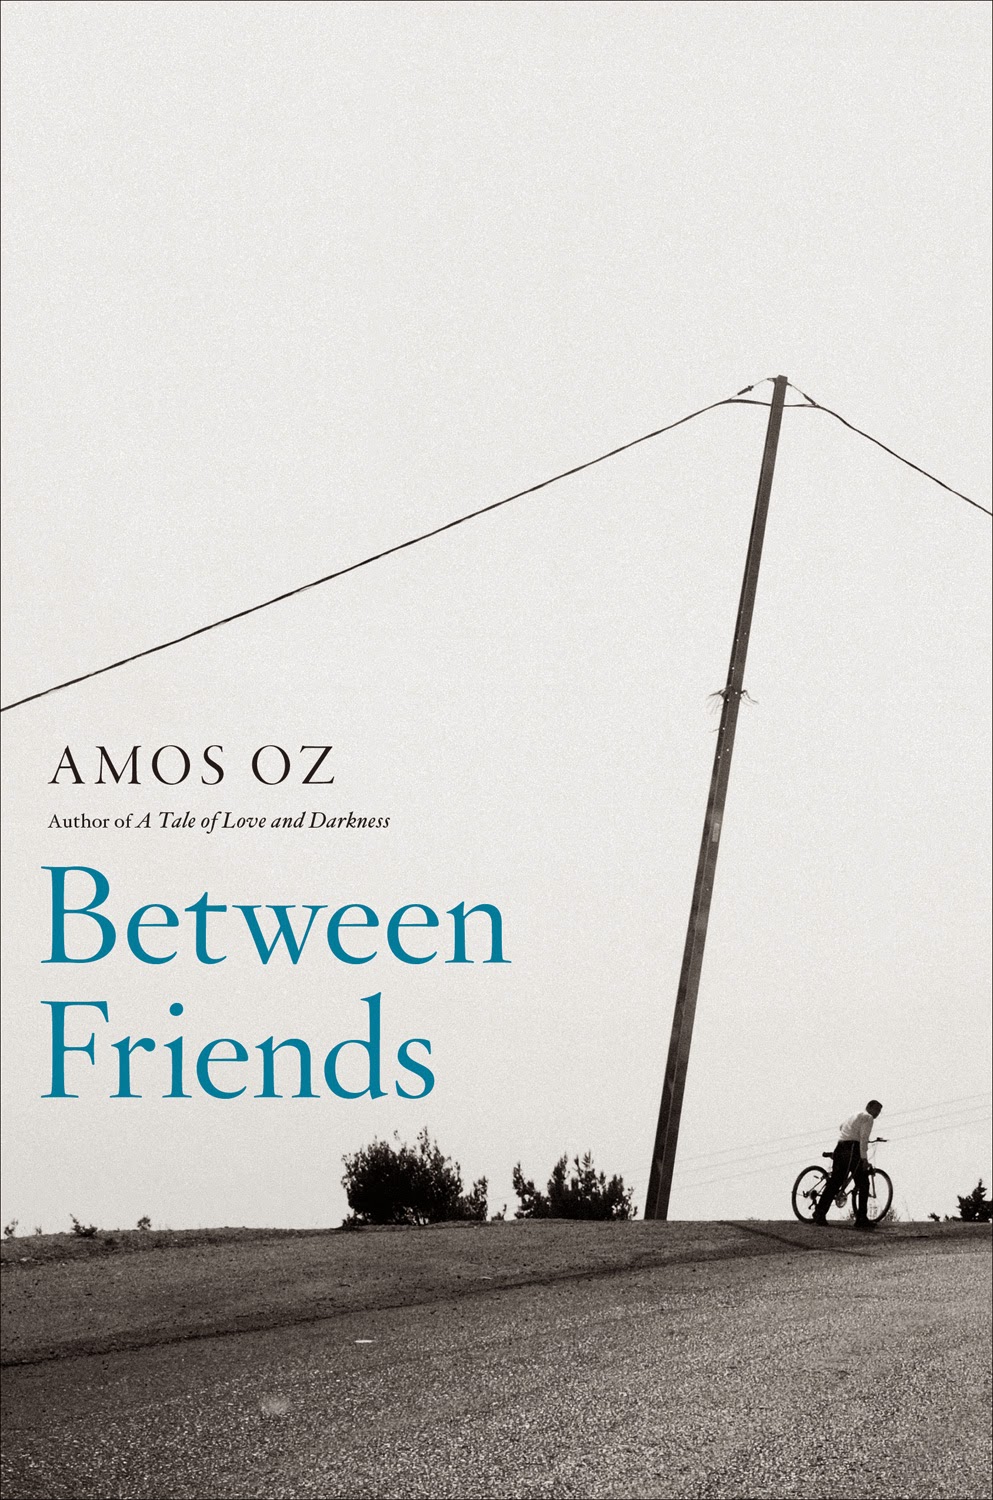 http://discover.halifaxpubliclibraries.ca/?q=title:%22between%20friends%22amos